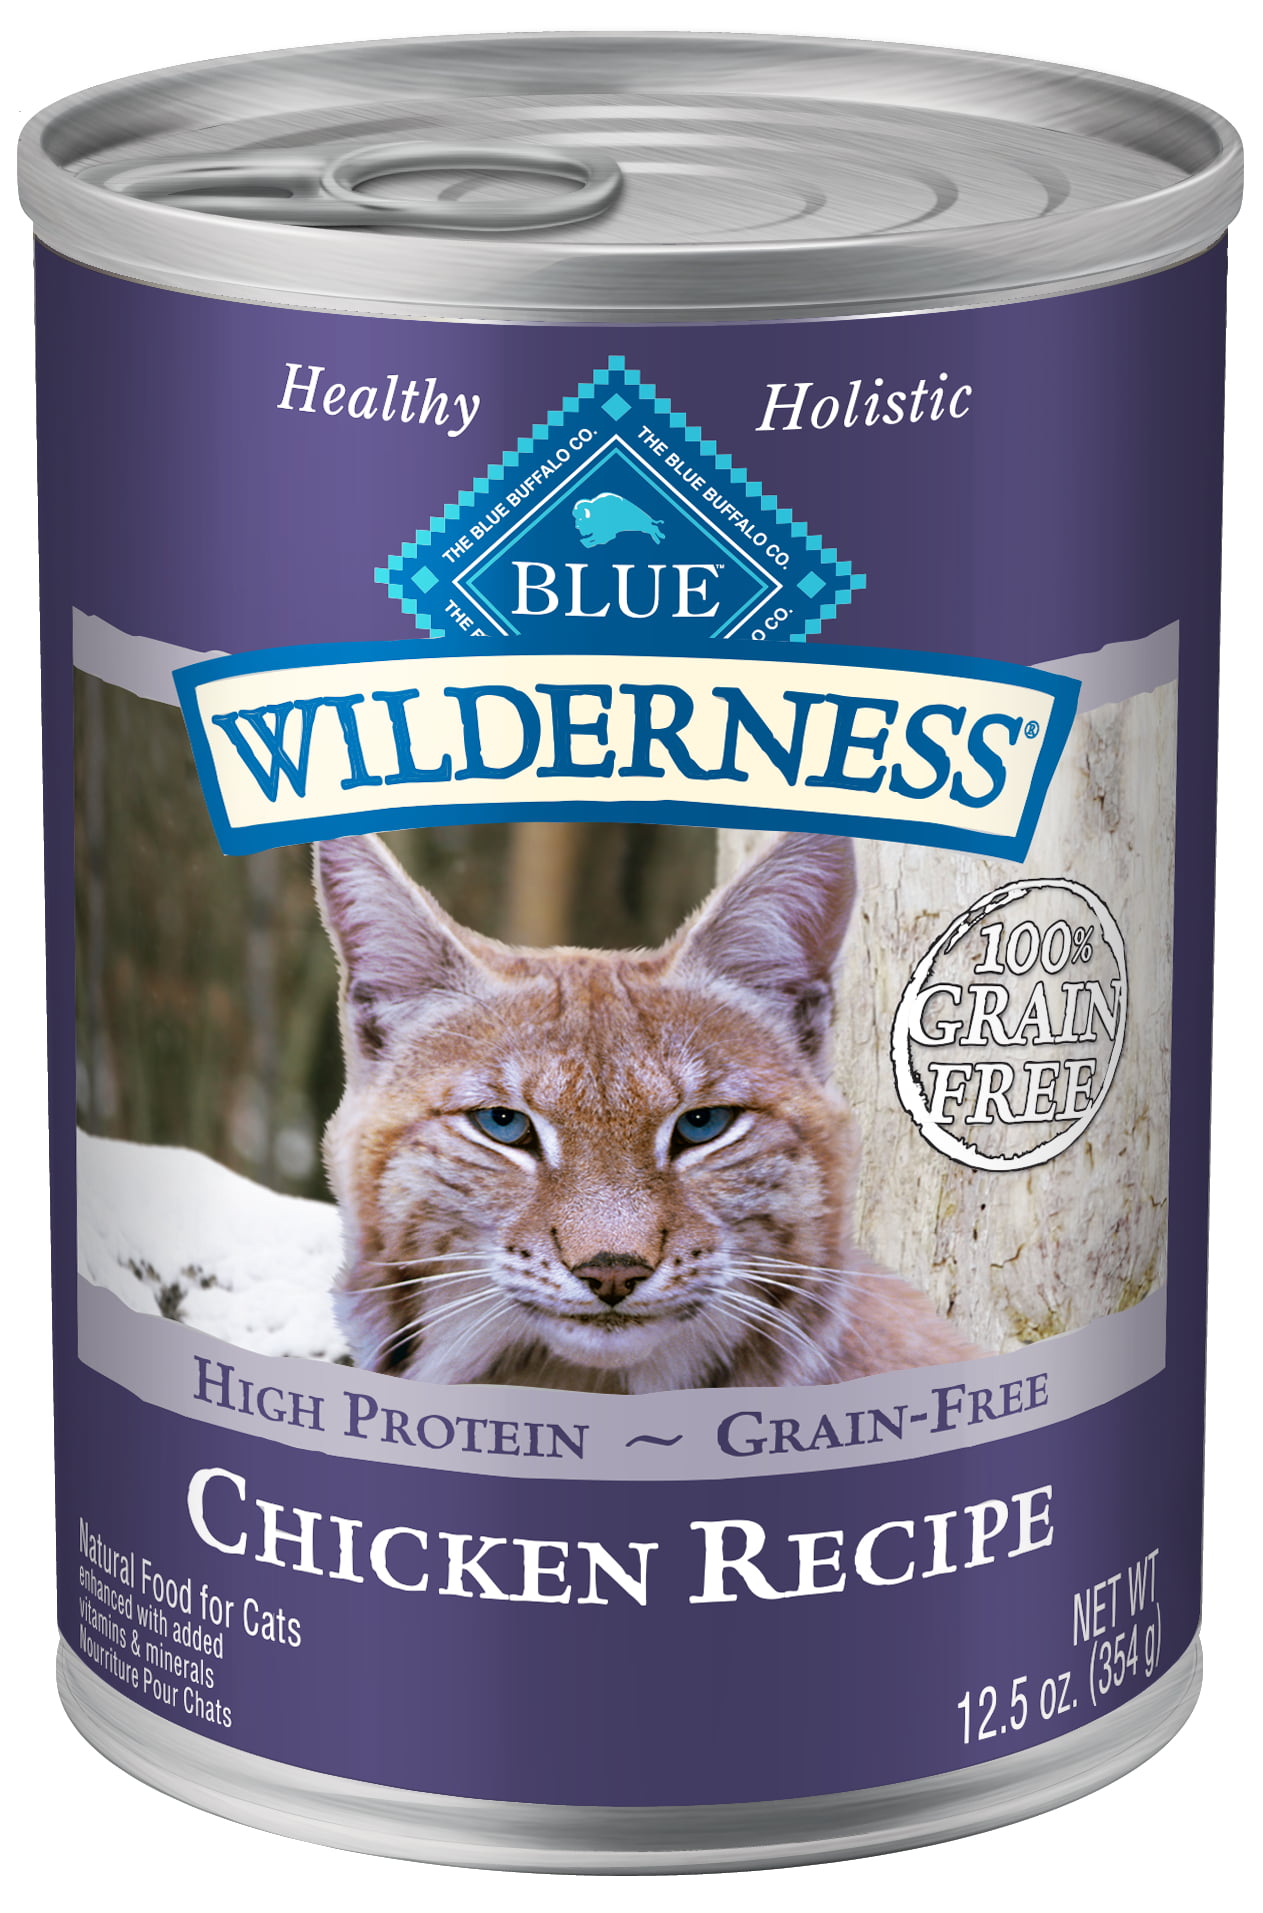 Protein Foods High Protein Canned Cat Food